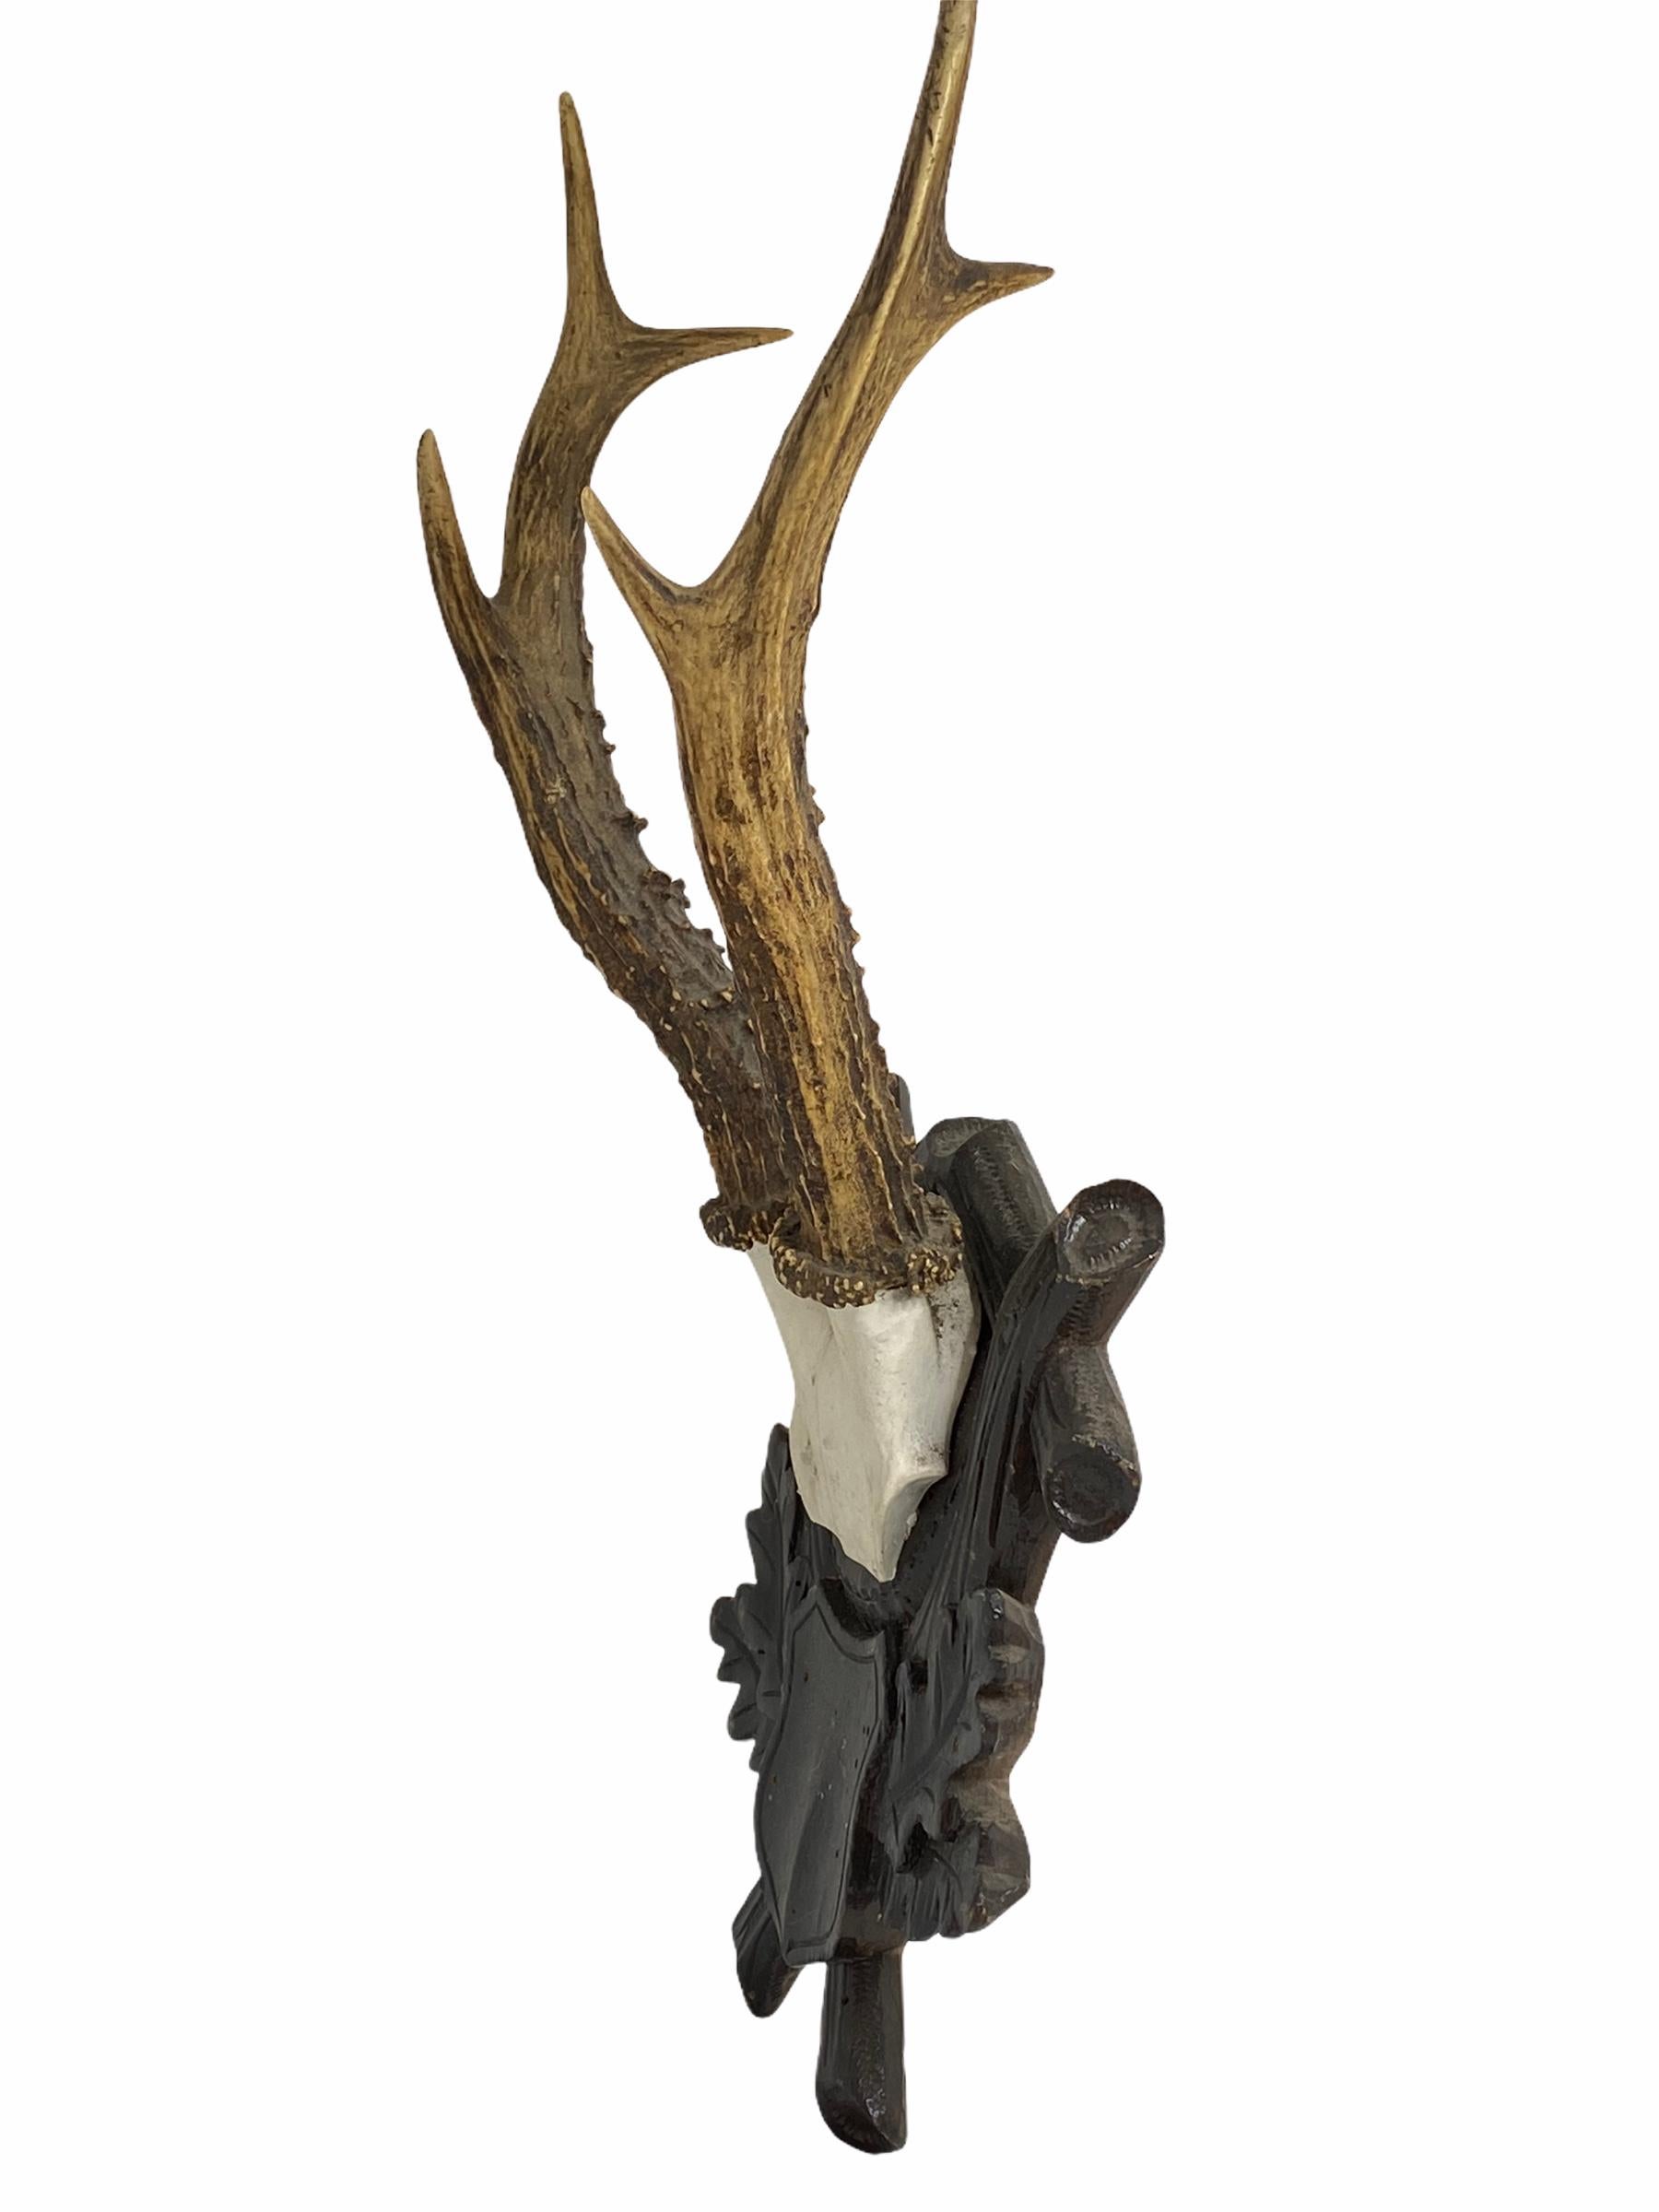 A beautiful antique Black Forest deer antler trophy on hand carved, Black Forest wooden plaque. A nice addition to your hunters loge, cabin or just to display it in your house. Found at an estate sale in Vienna, Austria.